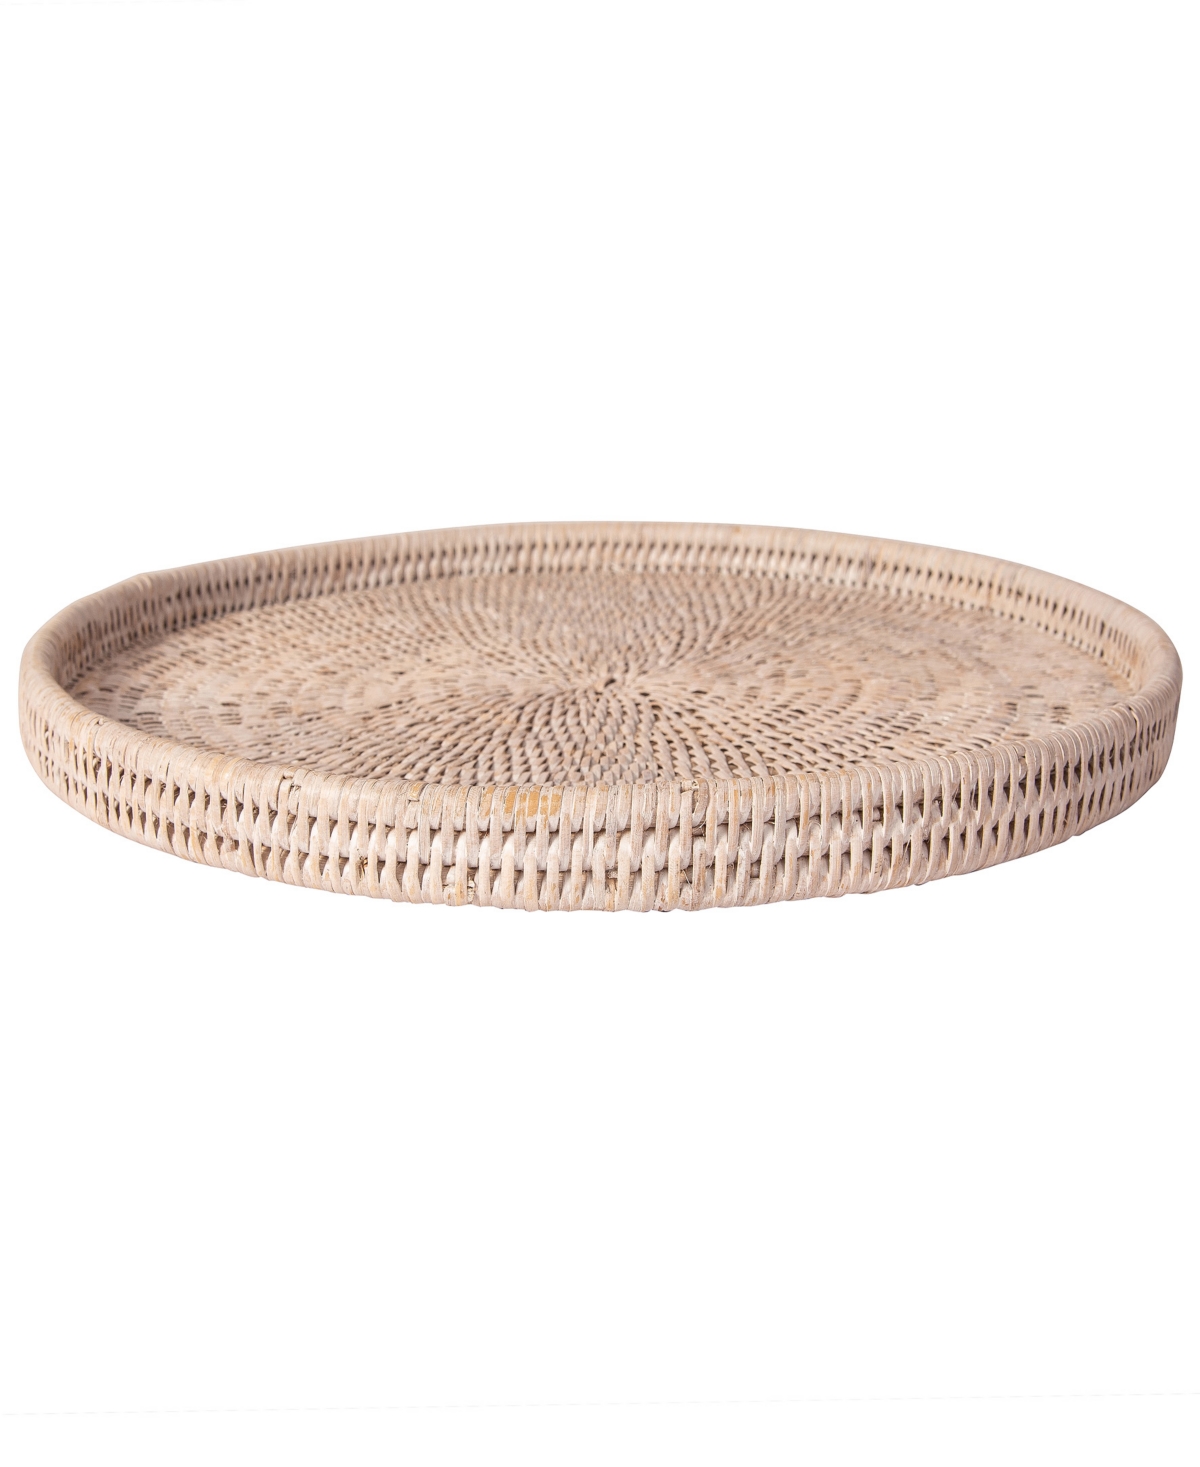 Artifacts Trading Company Artifacts Rattan Round Flat Tray In White Wash